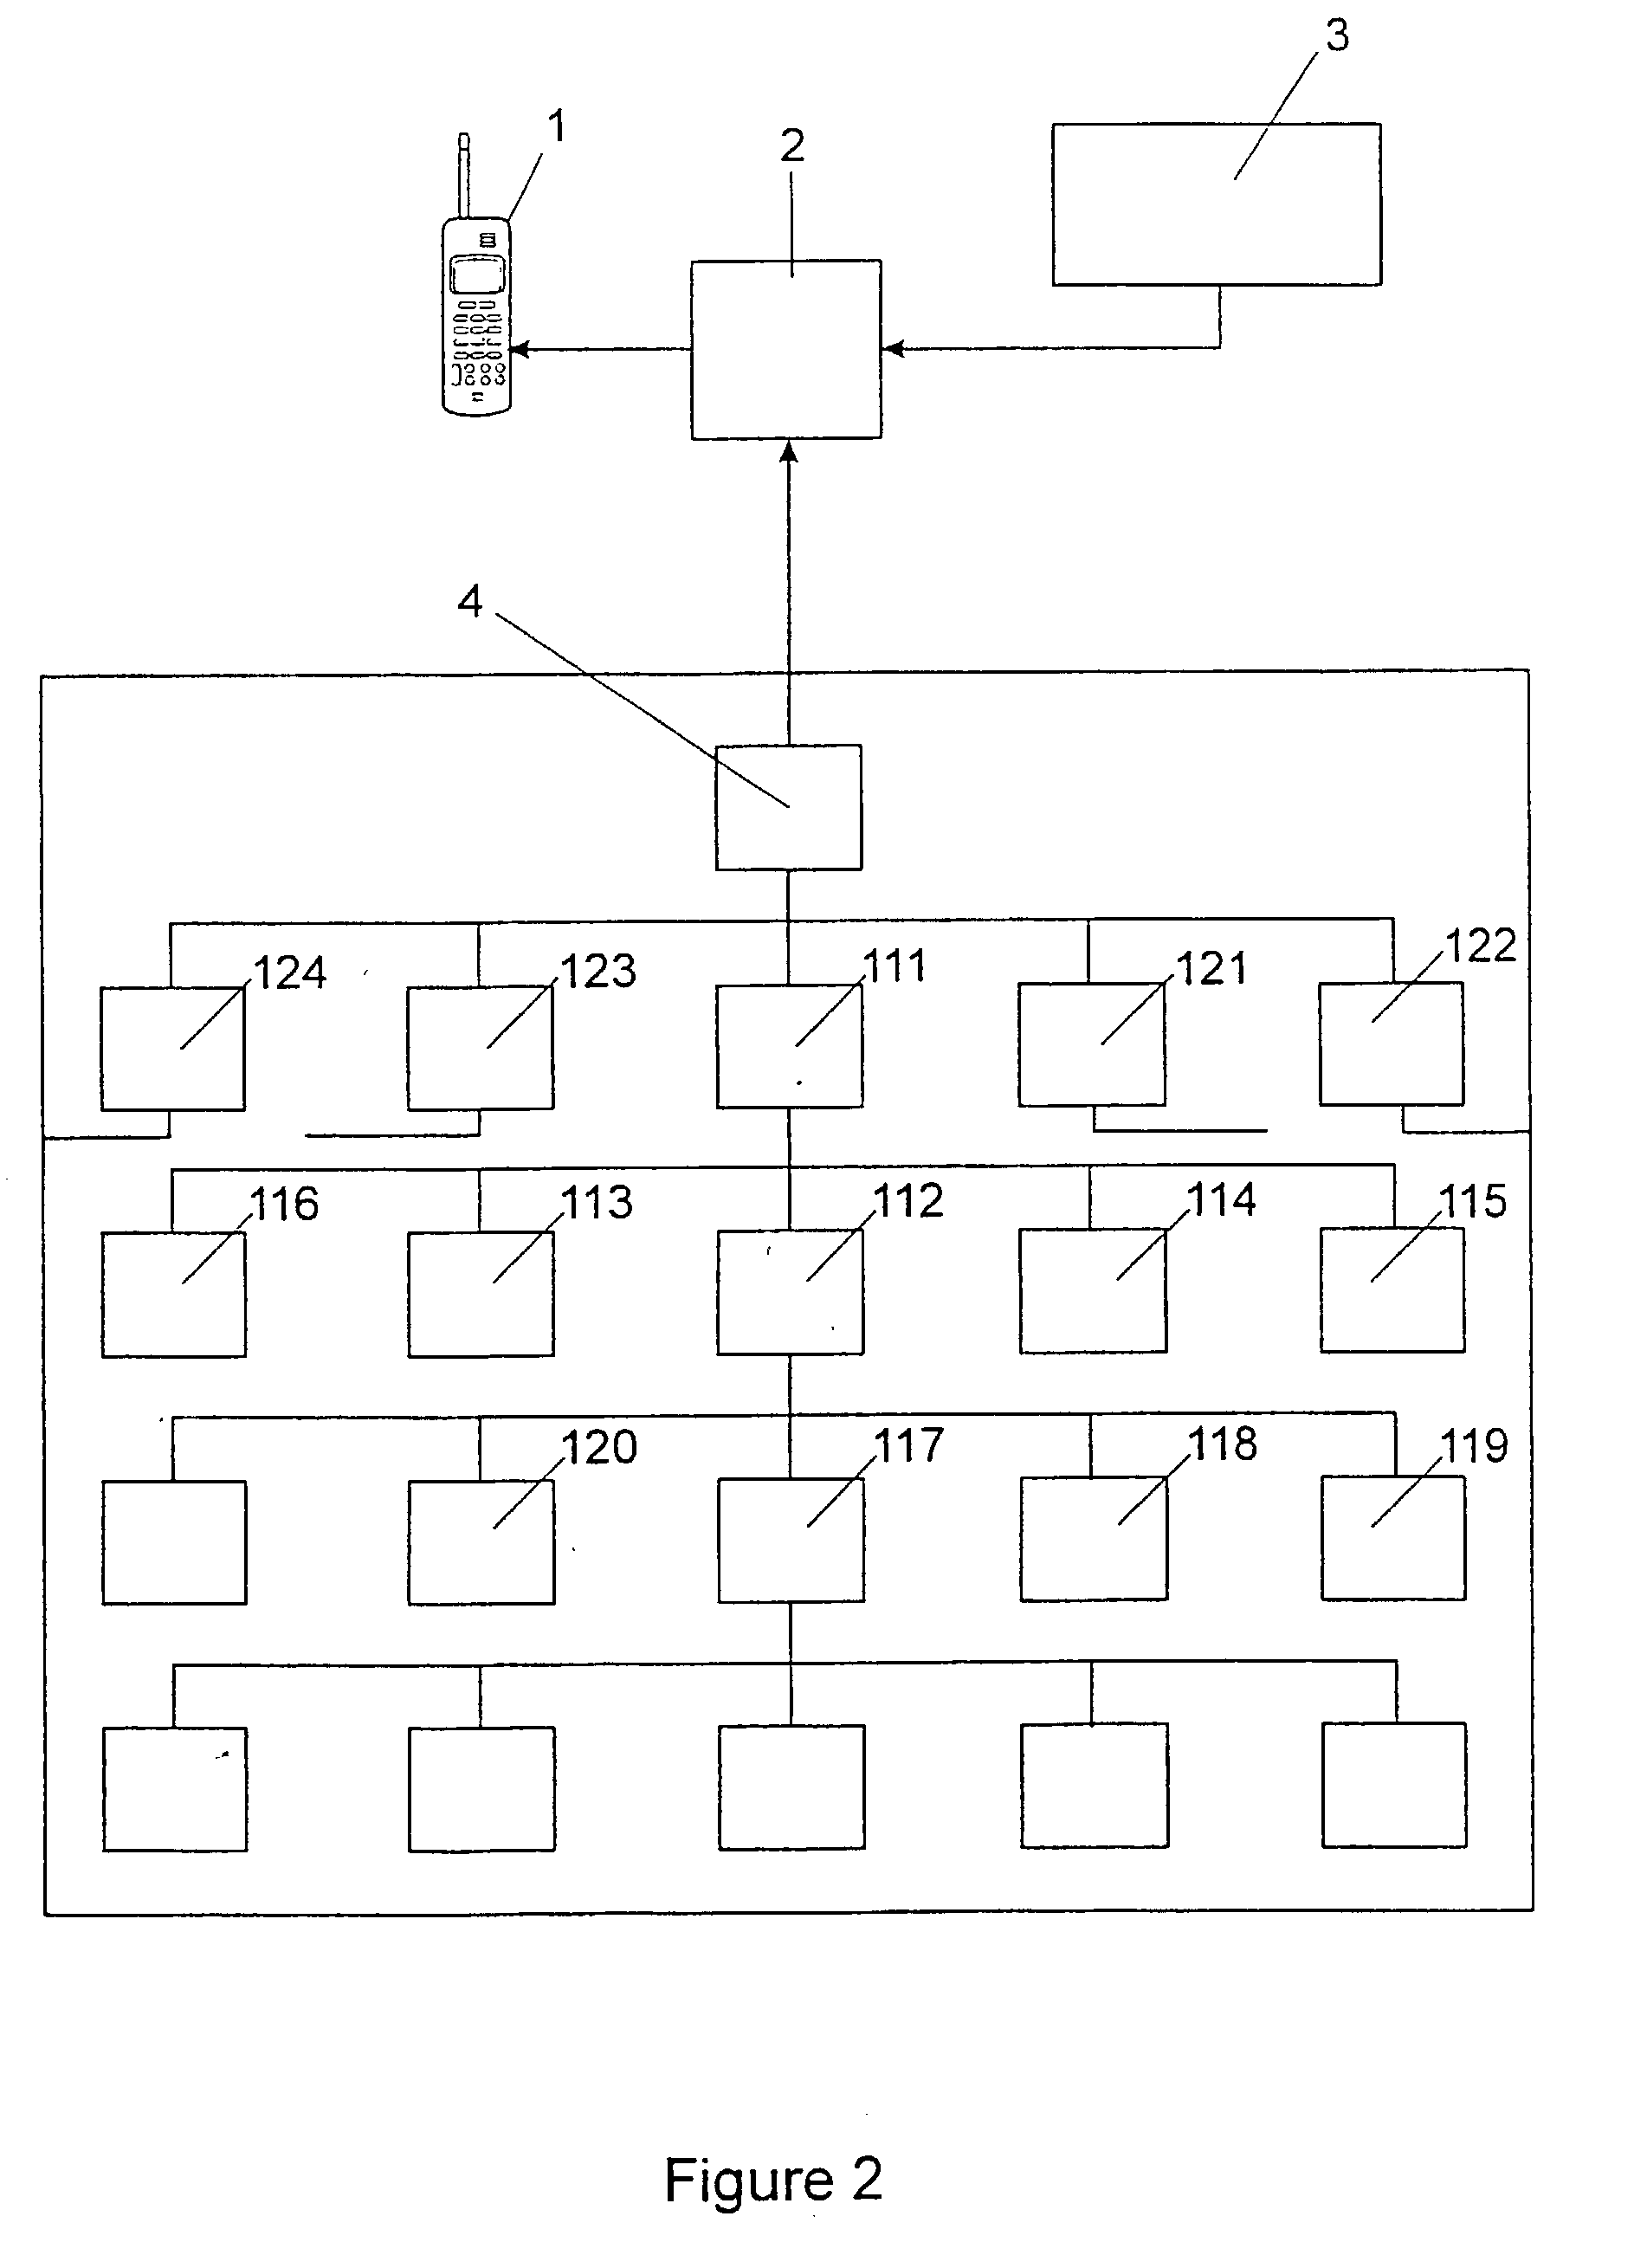 Banking system with enhanced identification of financial accounts